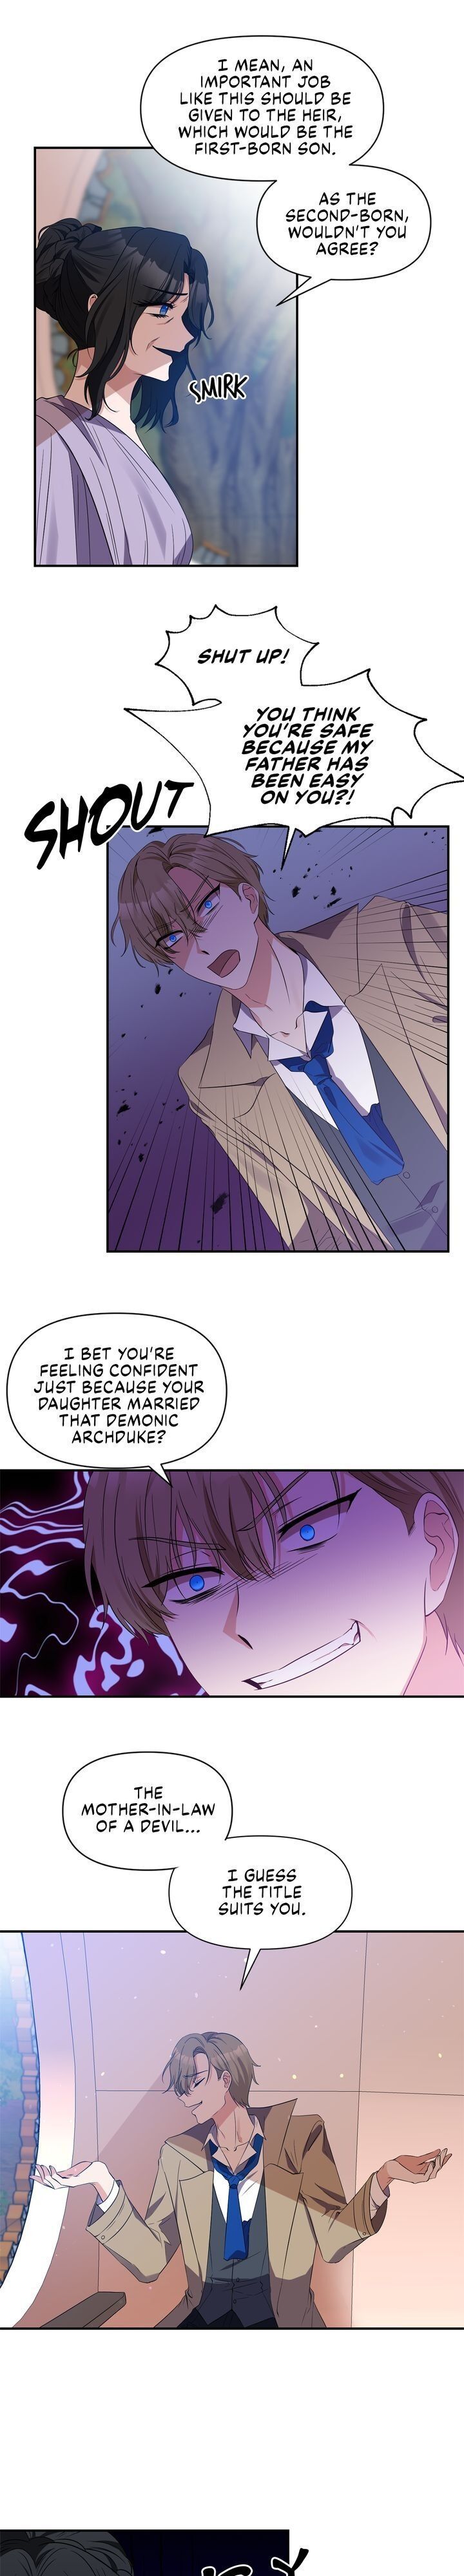 The Tyrant Husband Has Changed Chapter 020 page 2